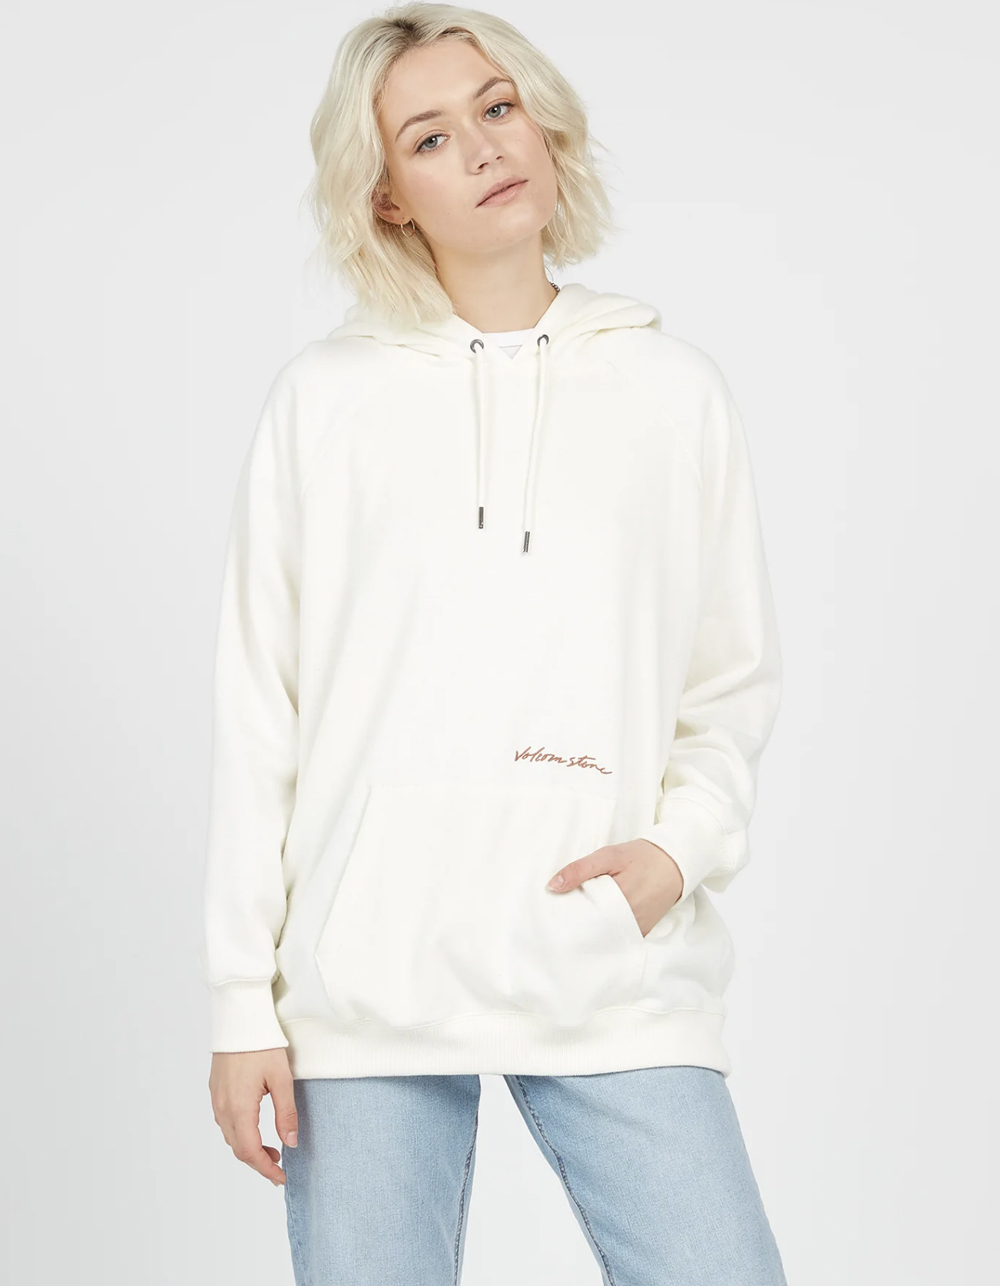 VOLCOM Truly Stoked Womens Oversized Hoodie - WHITE | Tillys